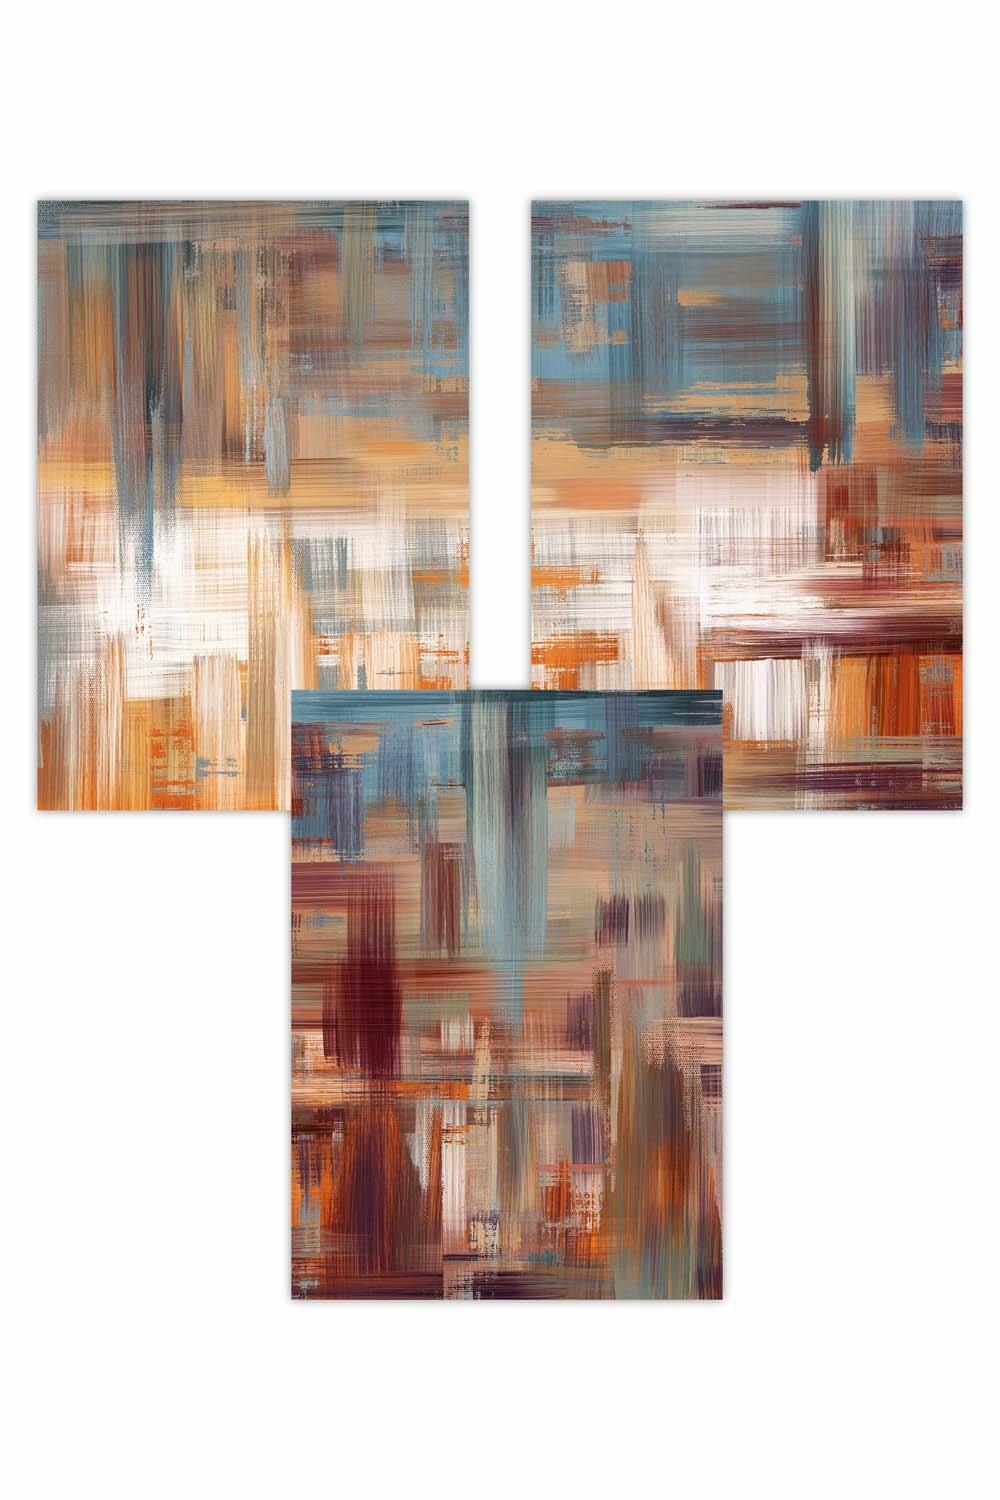 Set of 3 Geometric Abstract Urban Landscape In Blue Orange White Art Posters